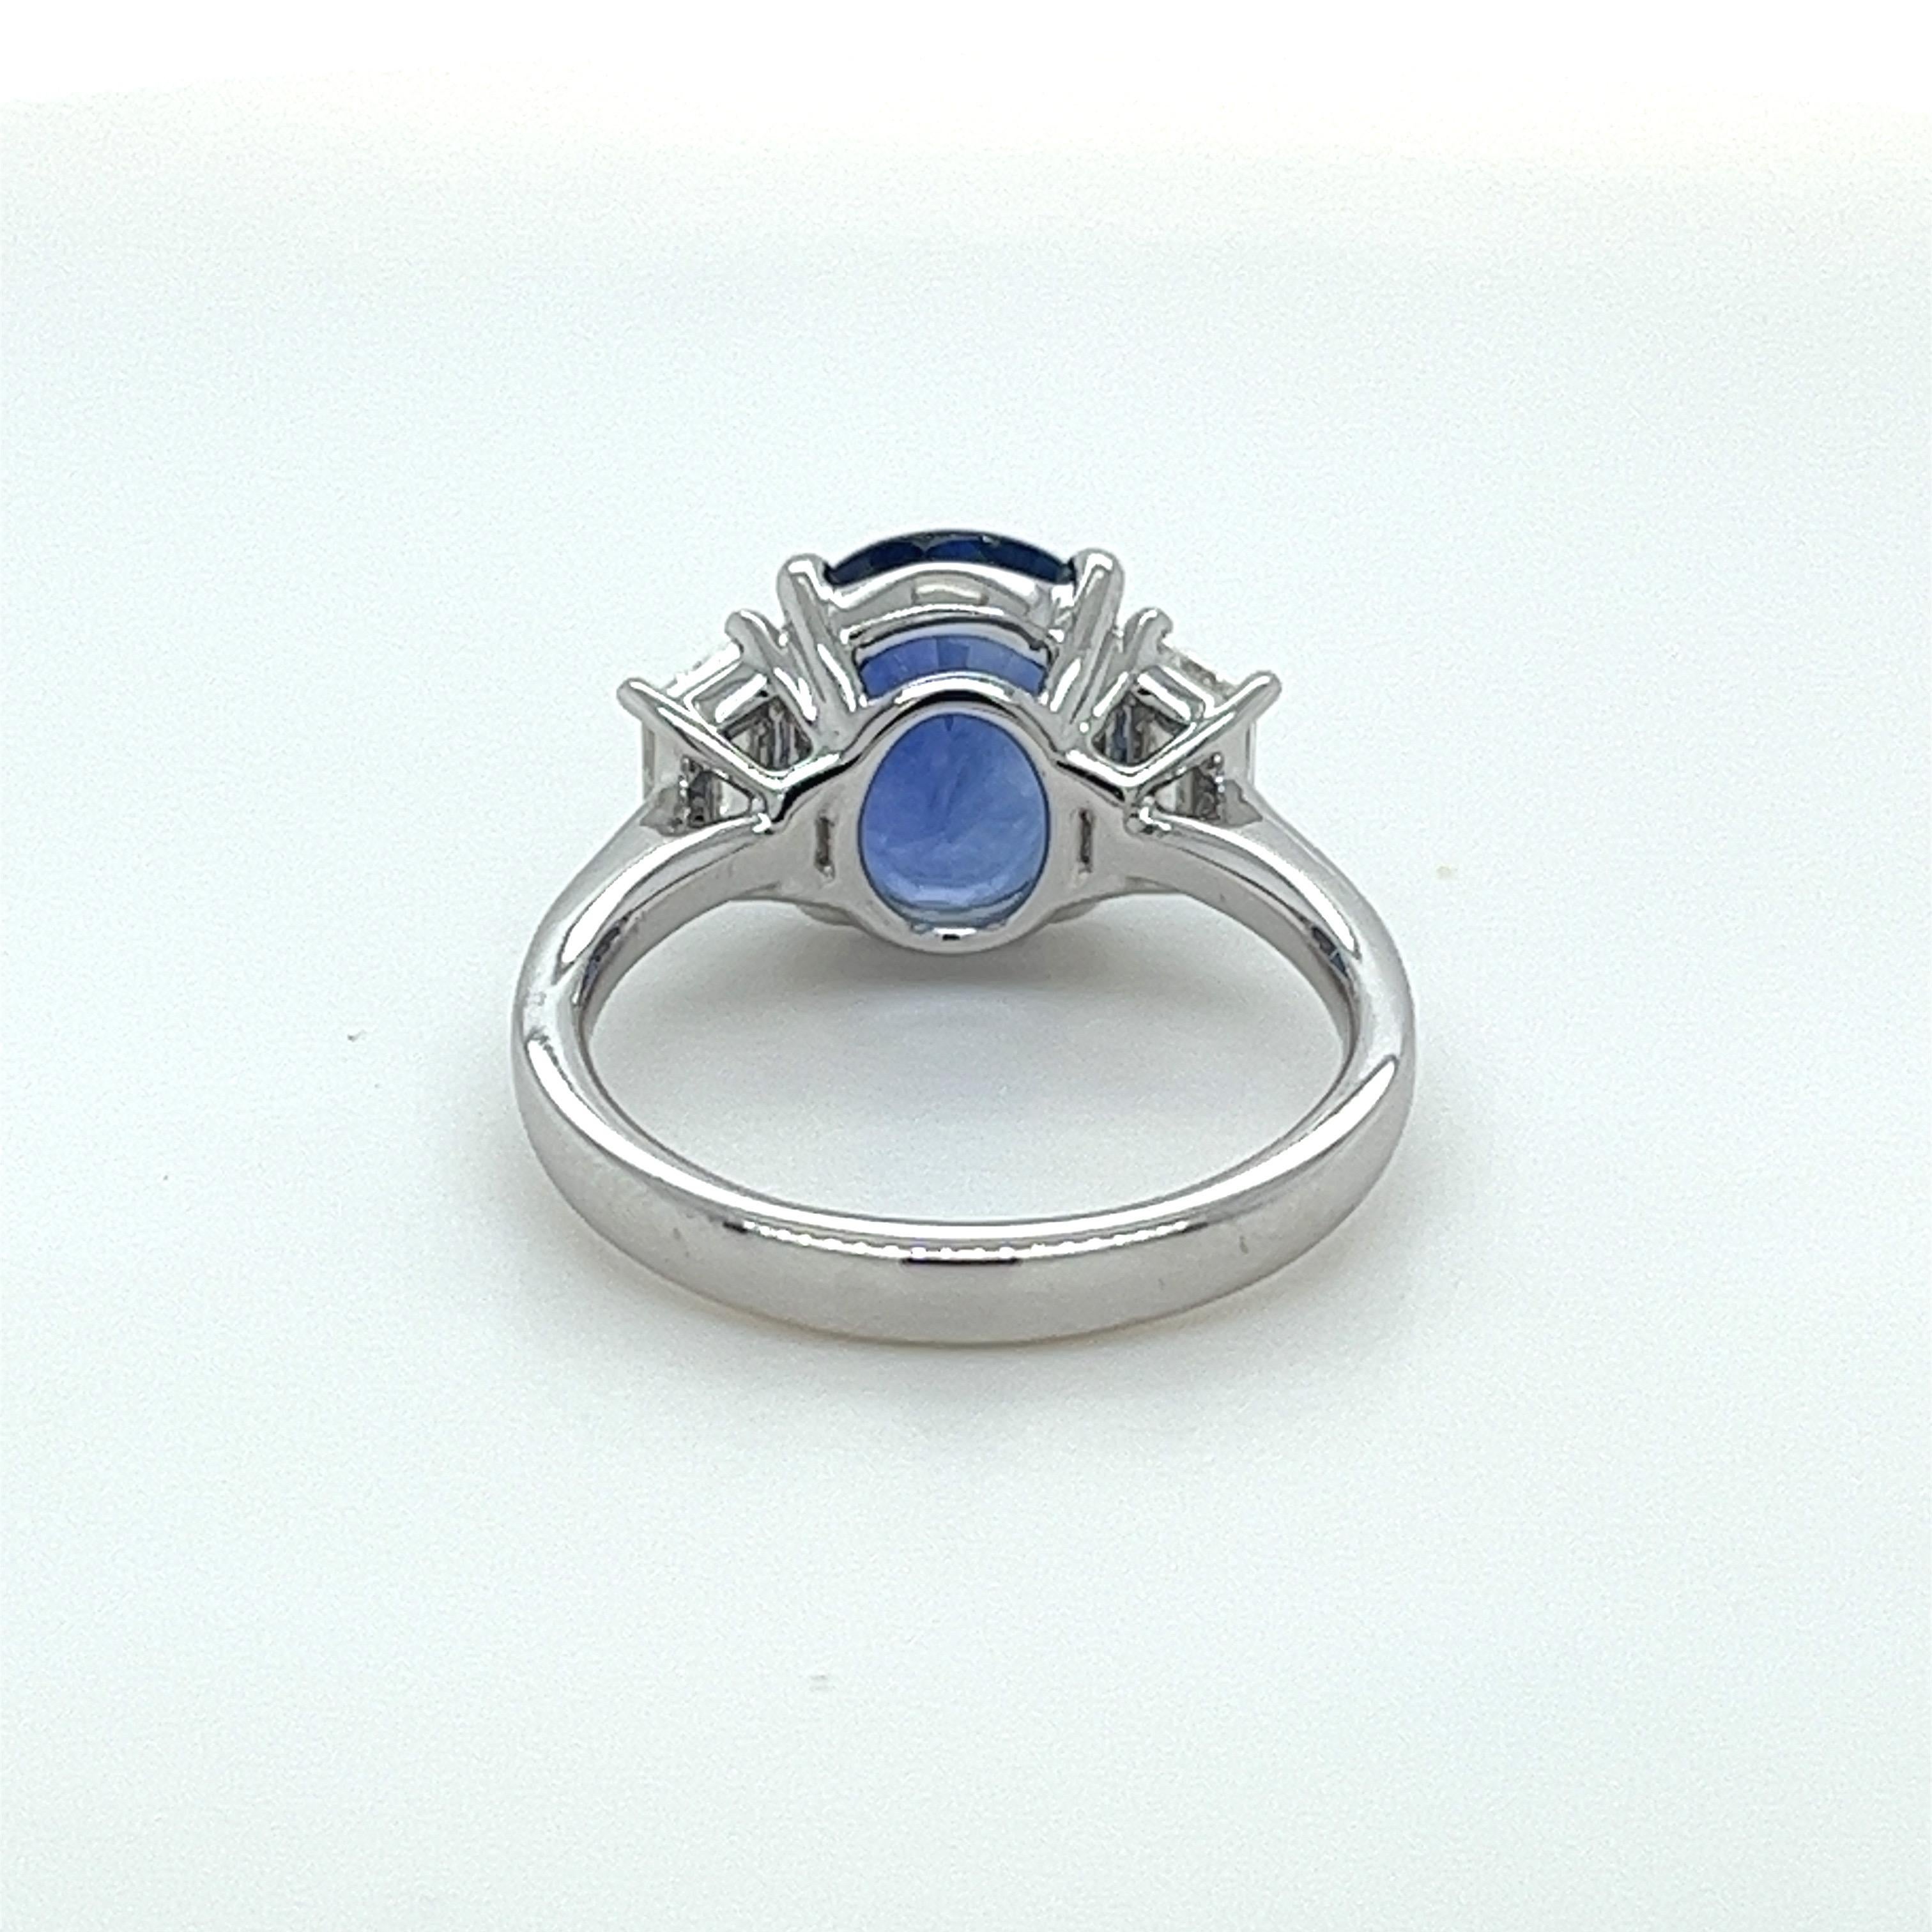 Oval Cut GIA Certified 3.73 Carat Oval Ceylon Sapphire & Diamond Ring in Platinum For Sale